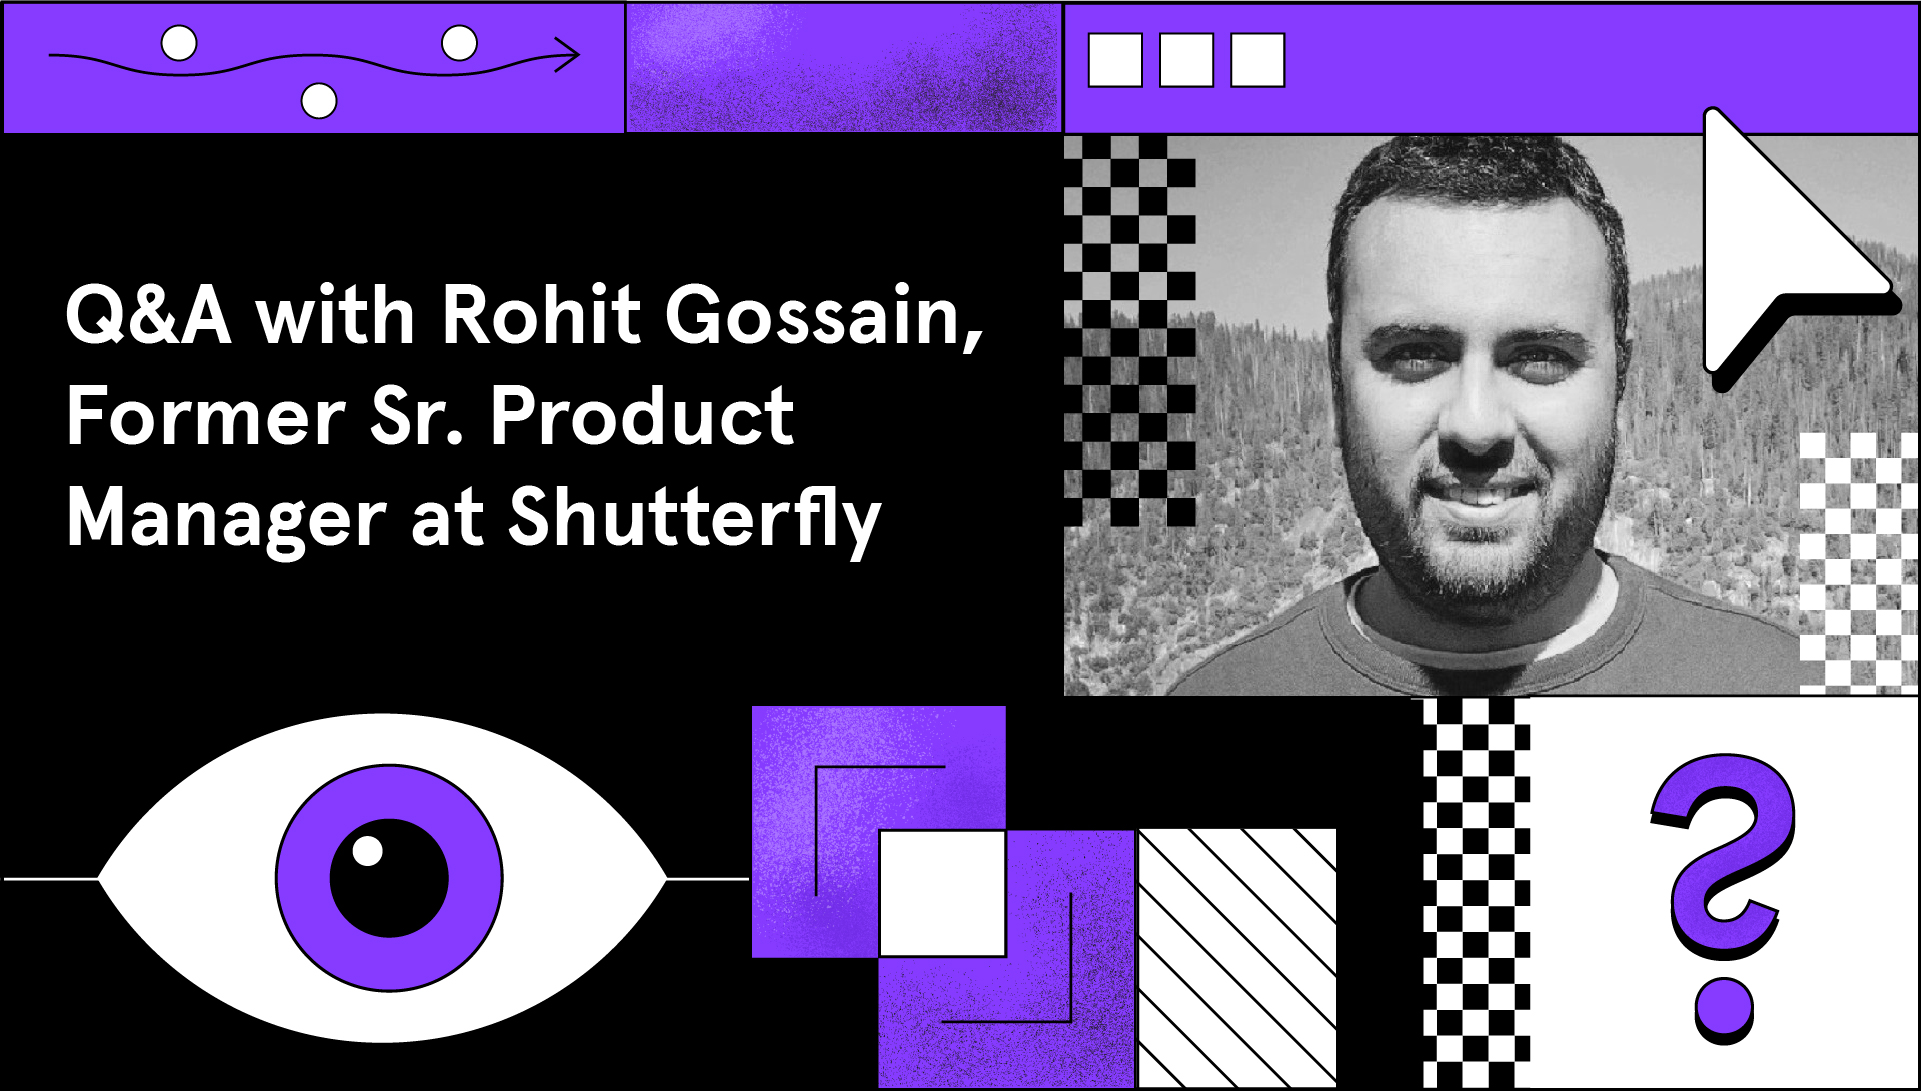 mixpanel q&a with rohit gossain